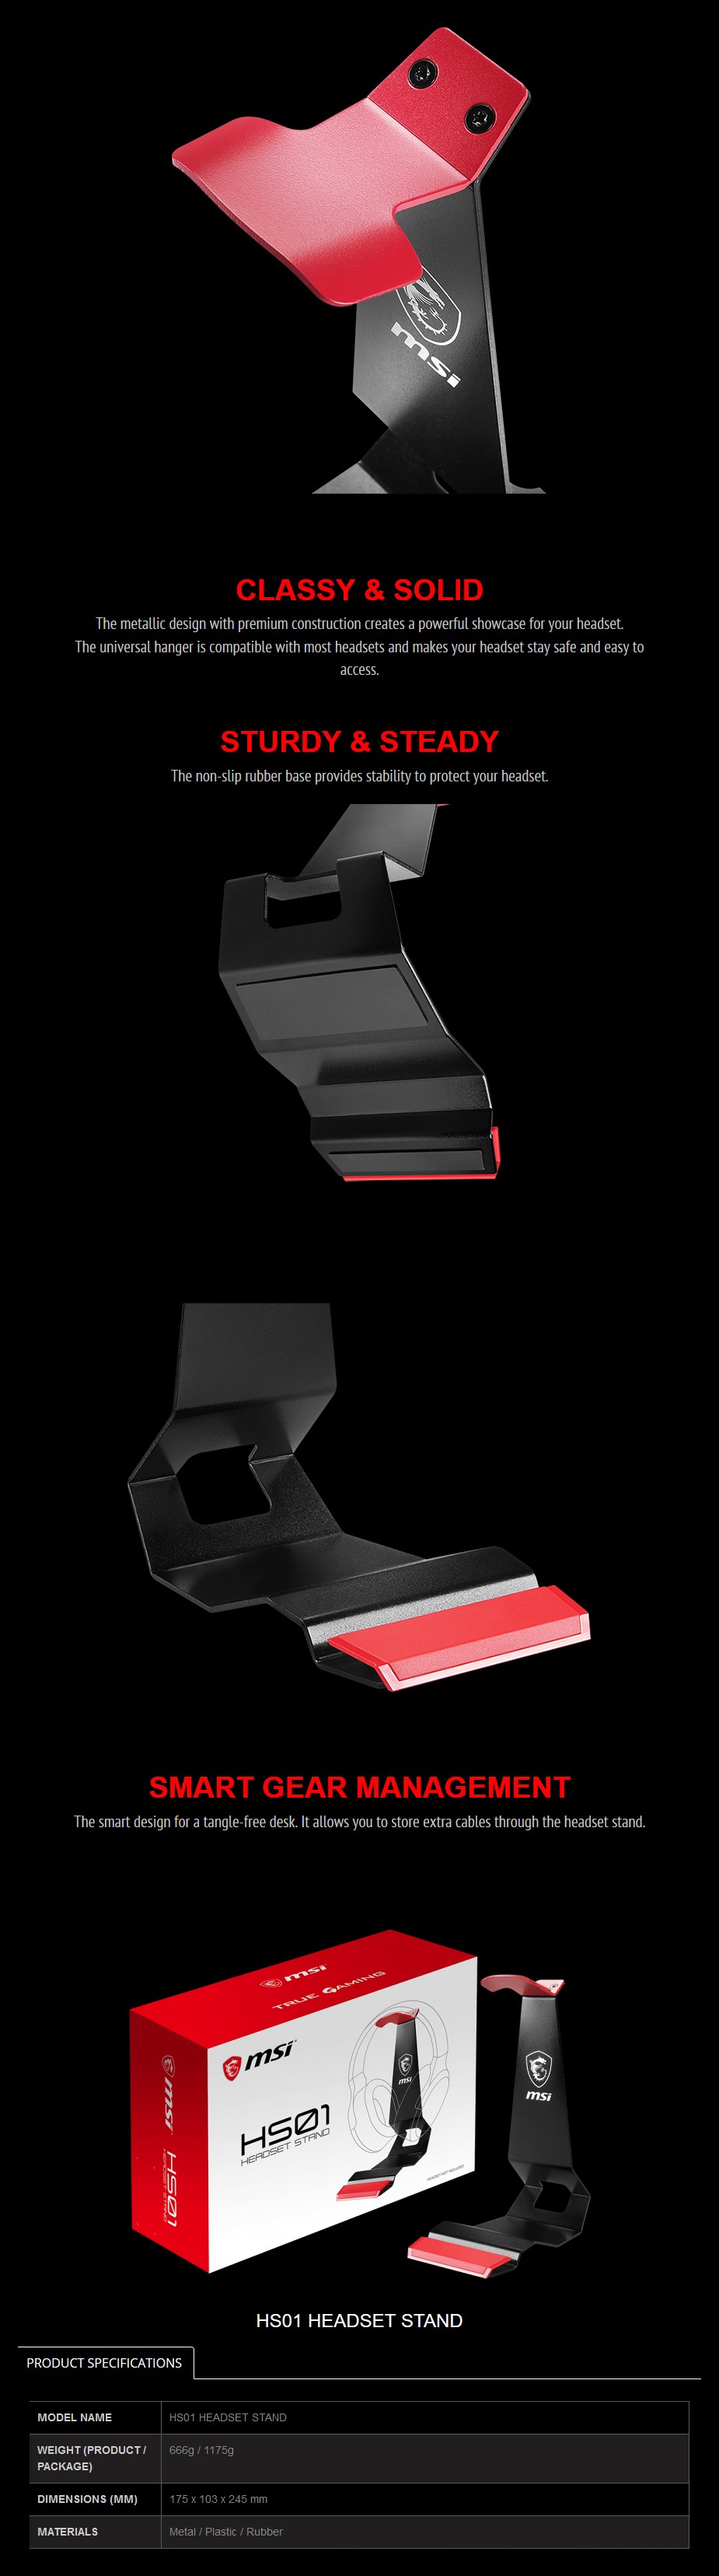 A large marketing image providing additional information about the product MSI HS01 Headset Stand - Additional alt info not provided